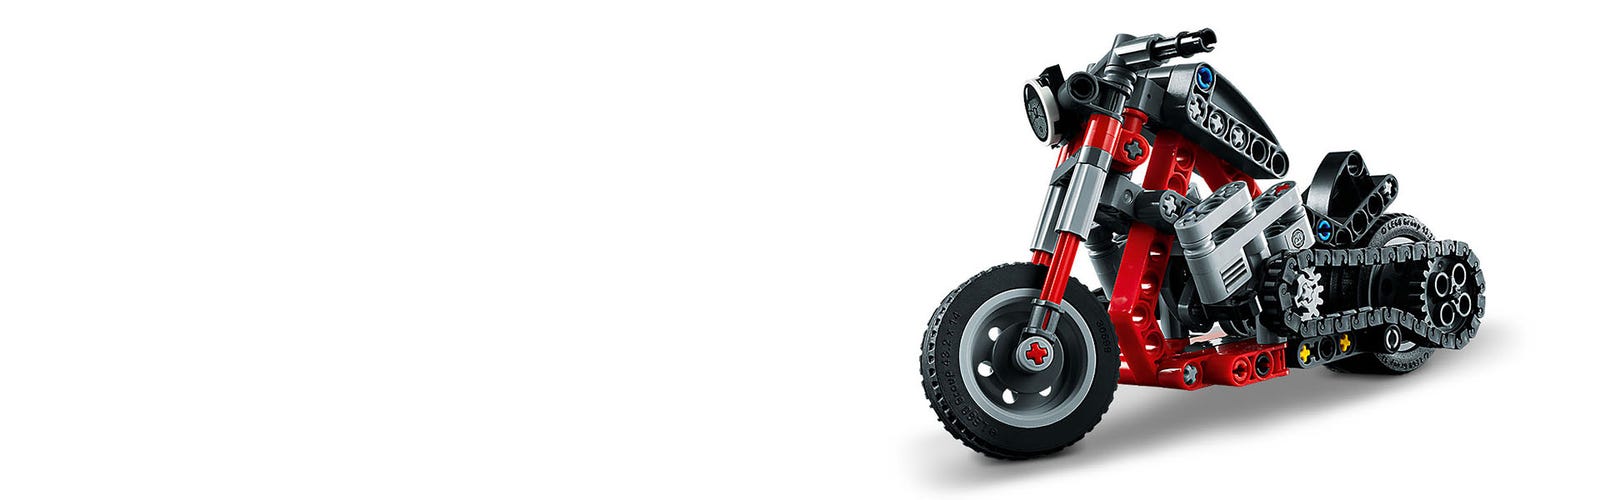 Motorcycle 42132 | Technic™ | Buy online at the Official LEGO® Shop US